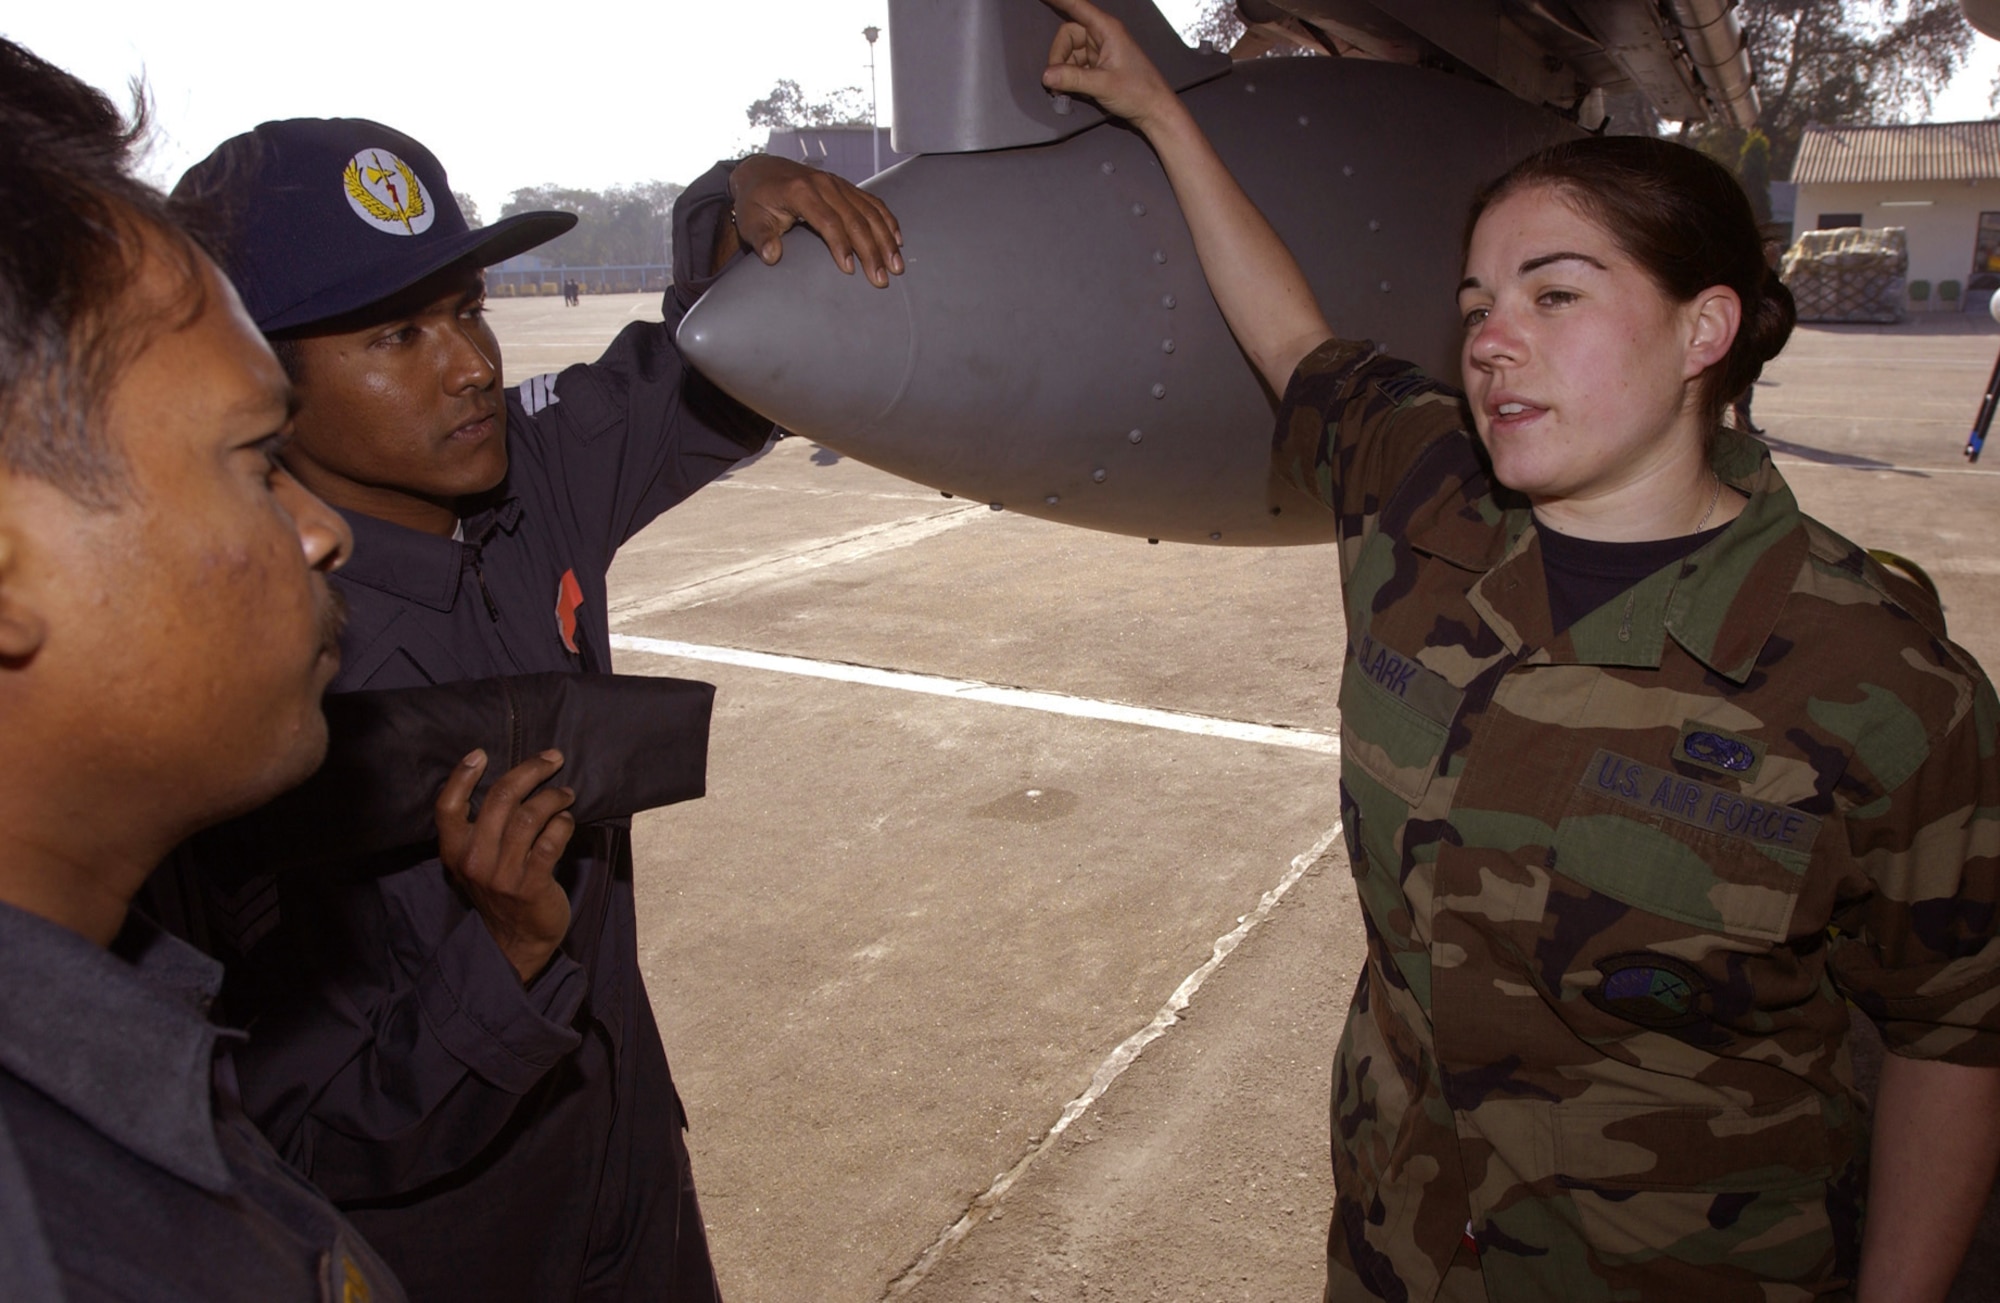 GWALIOR AIR FORCE STATION, India (AFPN) - Senior Airman Colleen Clark (right) discusses emergency fuel shutdown procedures and other F-15 Eagle maintenance issues with Indian air force maintenance workers here.  Airman Clark is a repair and reclamation specialist with the 3rd Equipment Maintenance Squadron deployed here from Elmendorf Air Force Base, Alaska, for Cope India 04.  (U.S. Air Force photo by Tech Sgt. Keith Brown)

